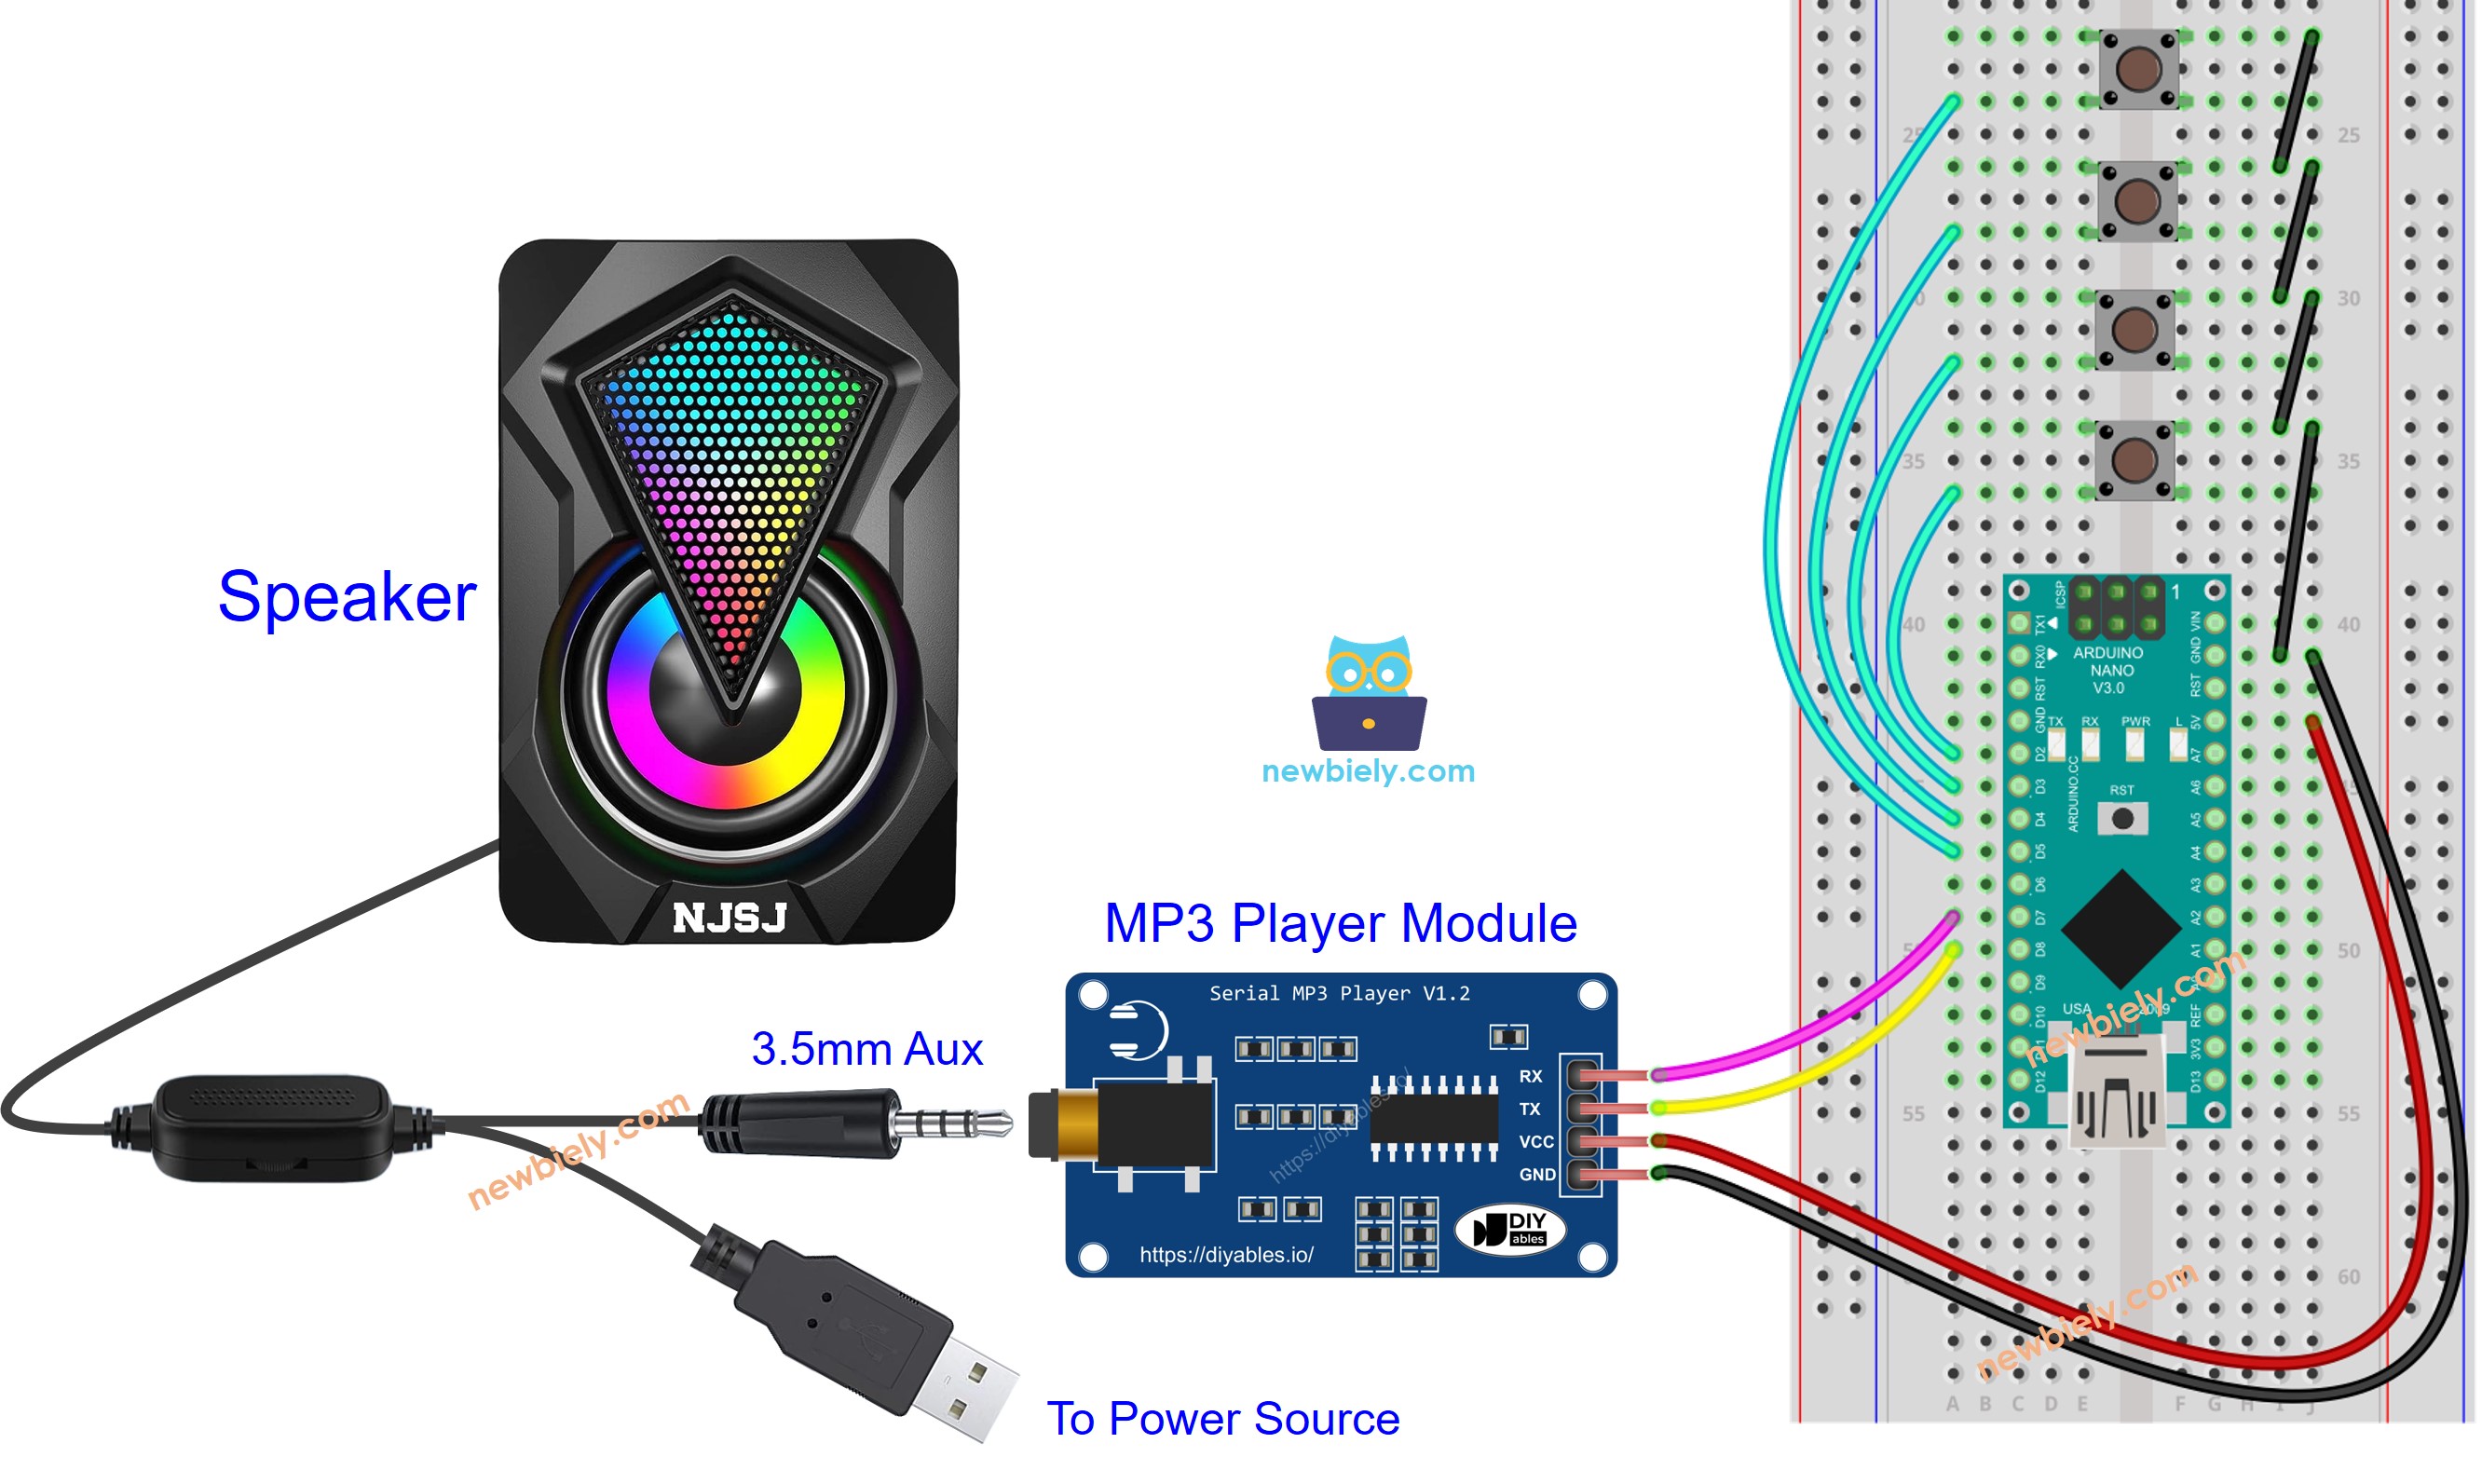 The wiring diagram between Arduino Nano and MP3 player speaker